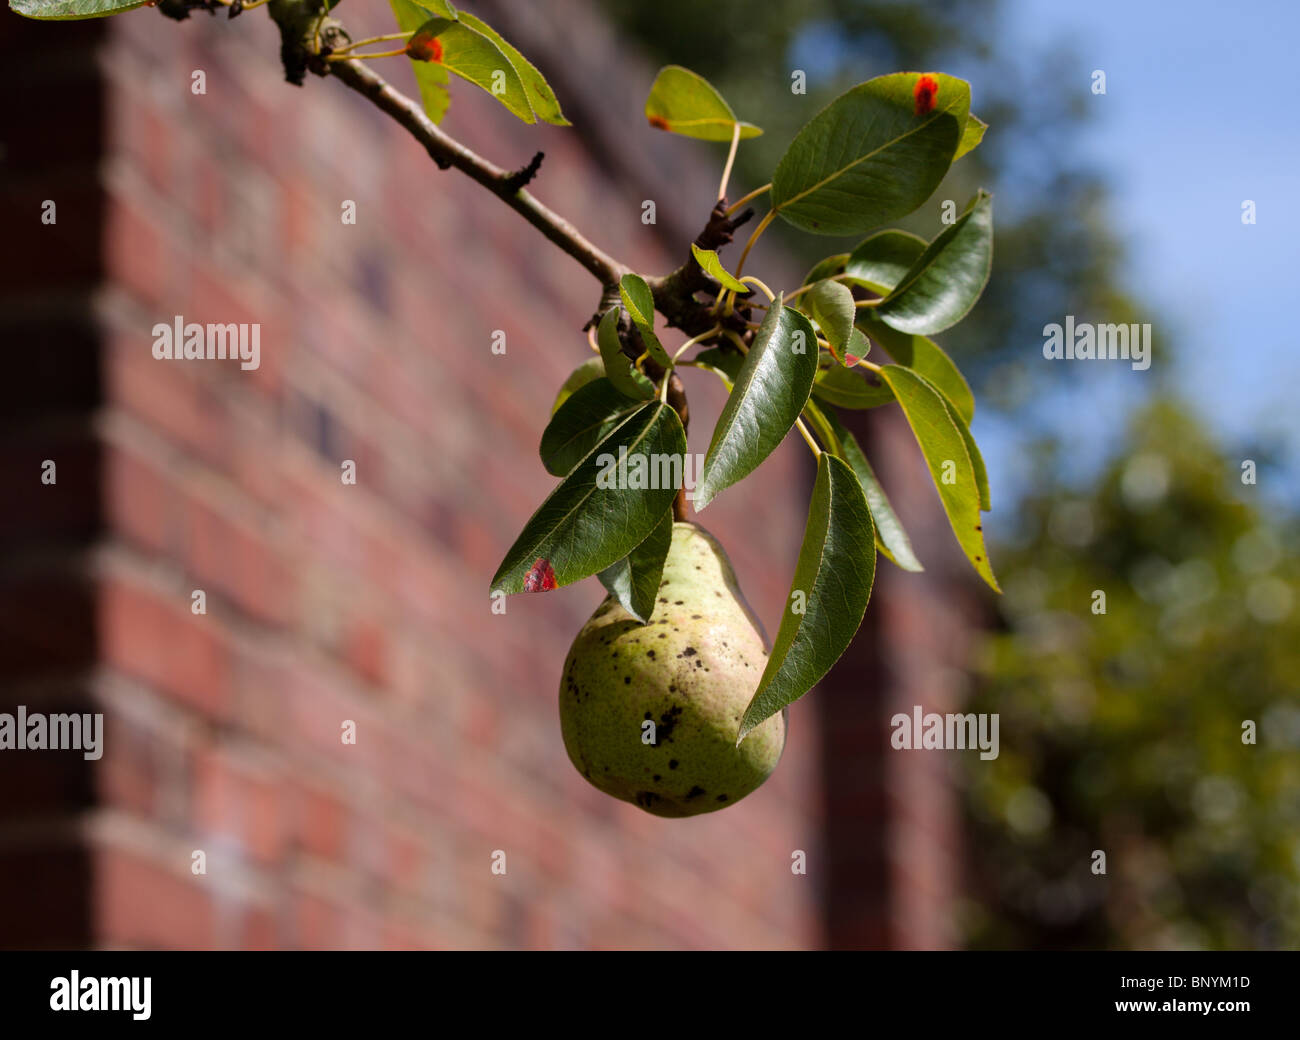 A conference pear, Pyrus communis, hanging from a pear tree near a brick wall in  a walled English garden Stock Photo